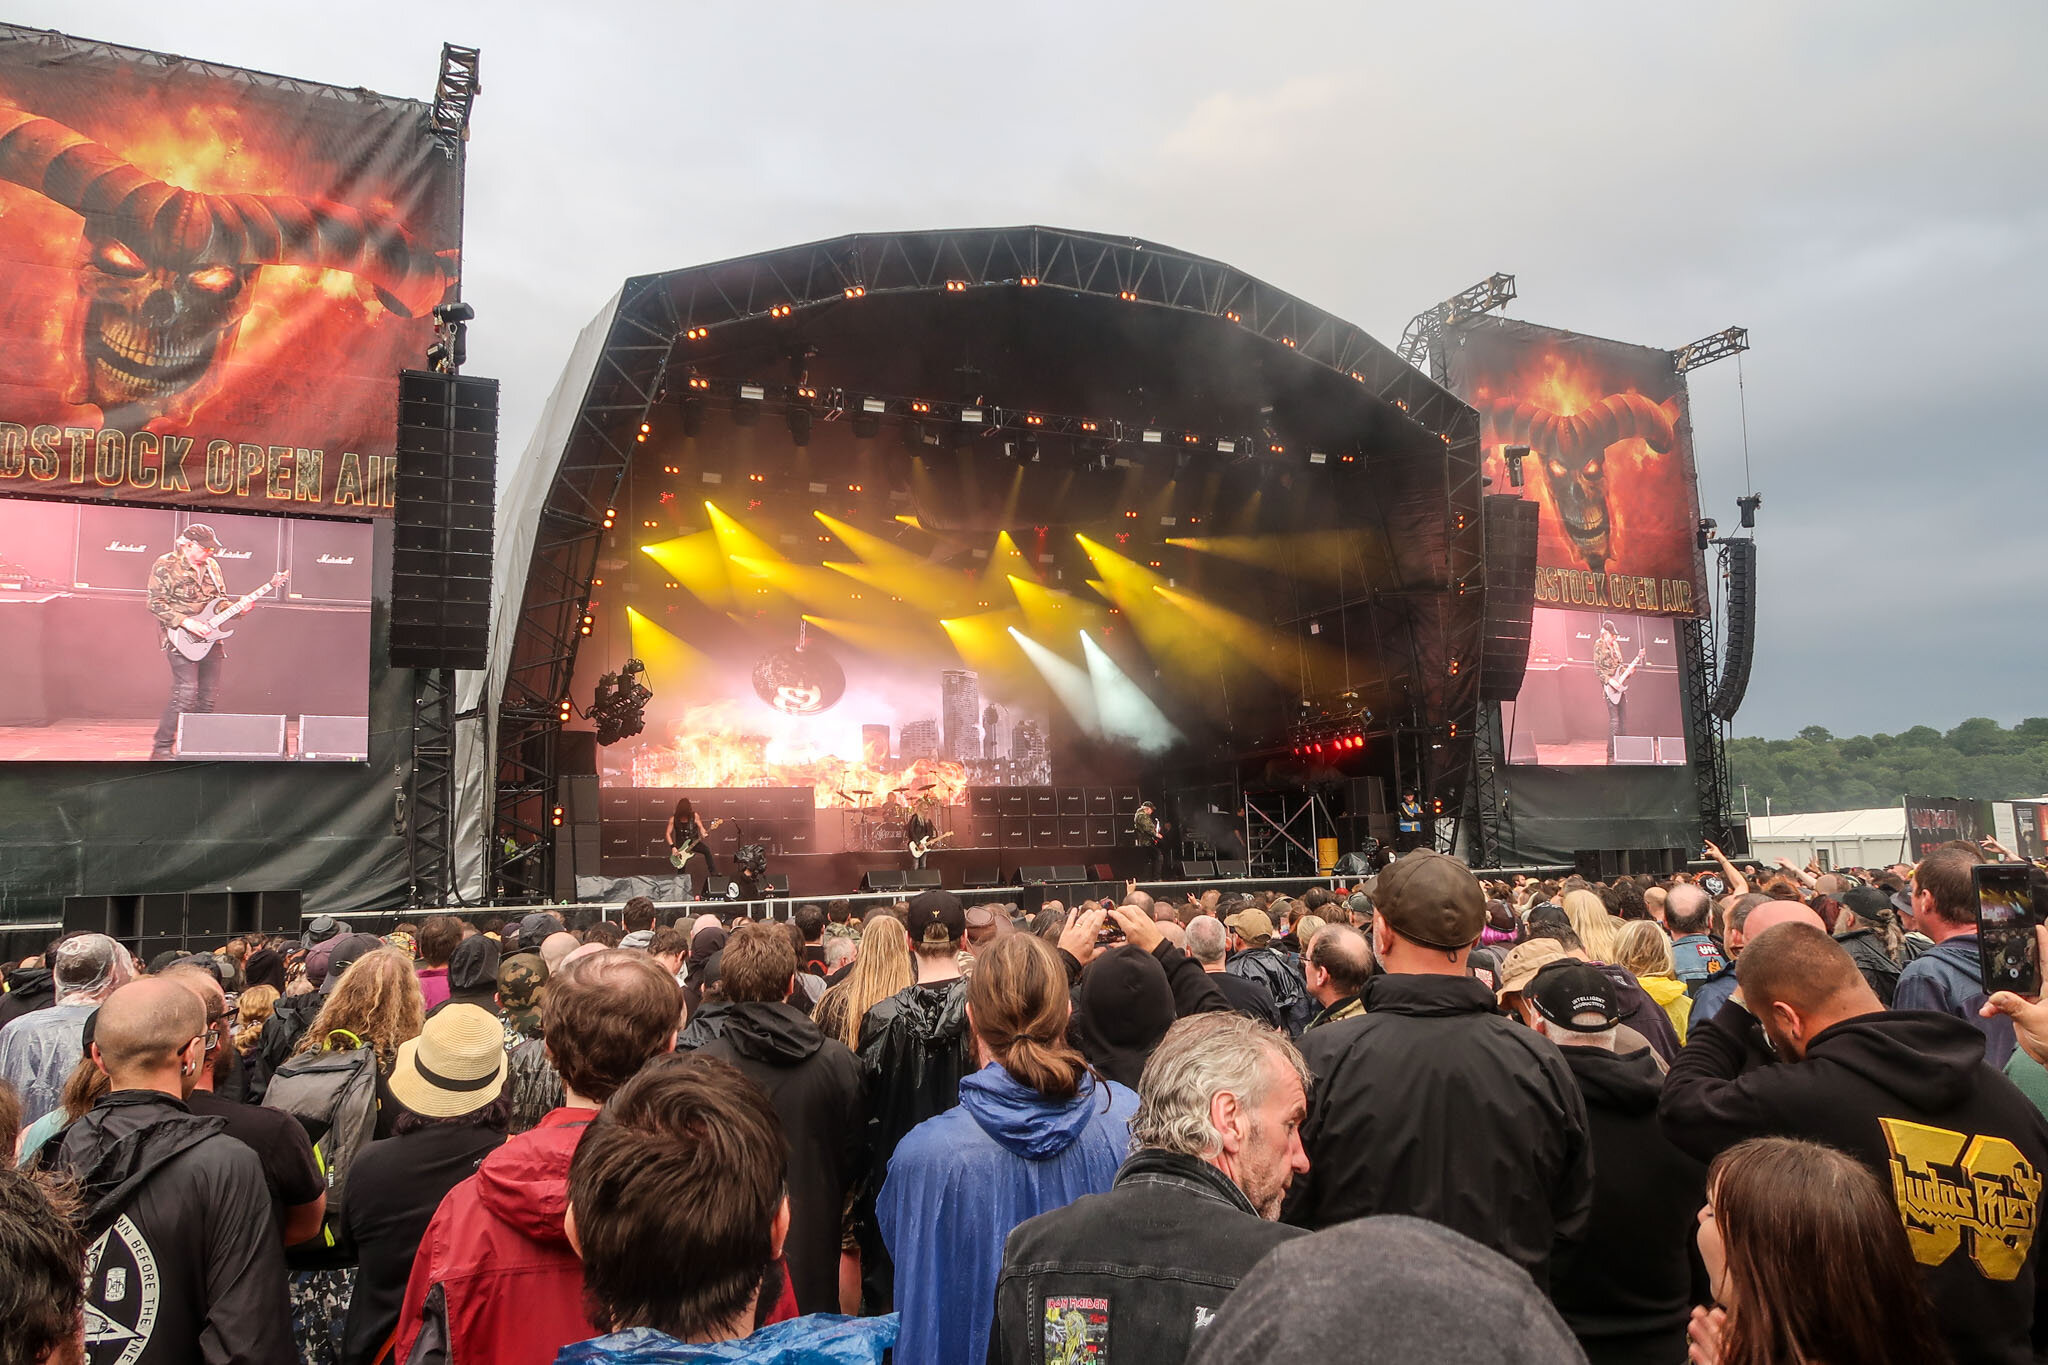 Saxon at Bloodstock Open Air 2021